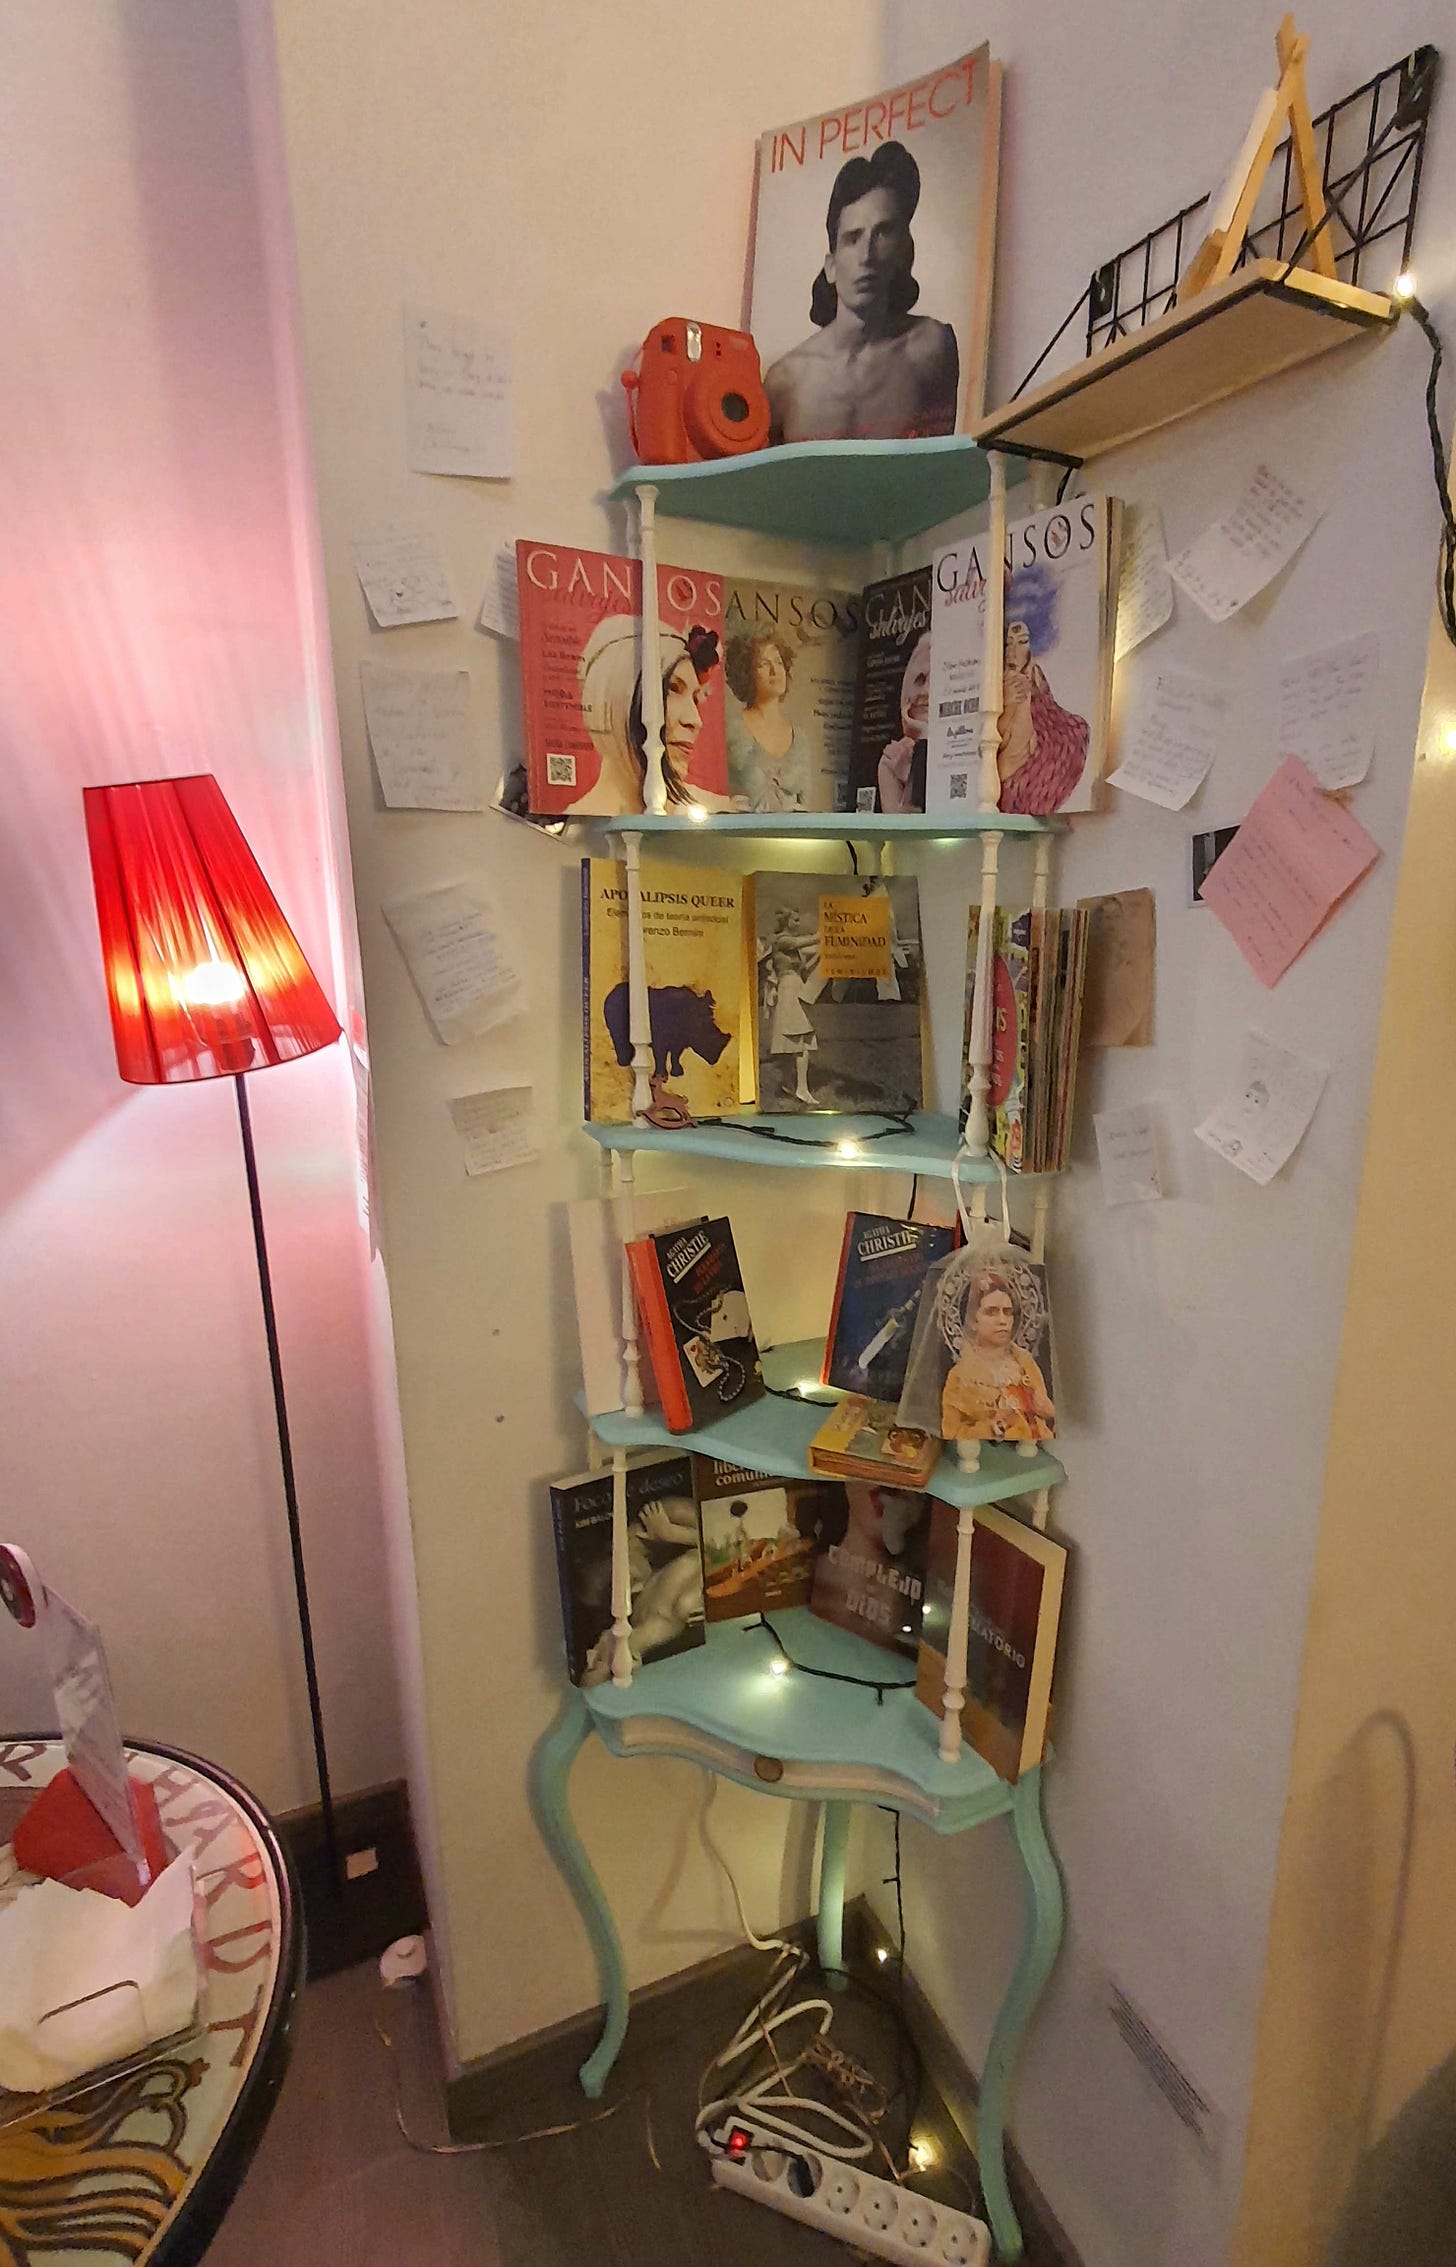 Feminist and queer literature on pale green corner stand, set off by pink walls and rosy lighting. 